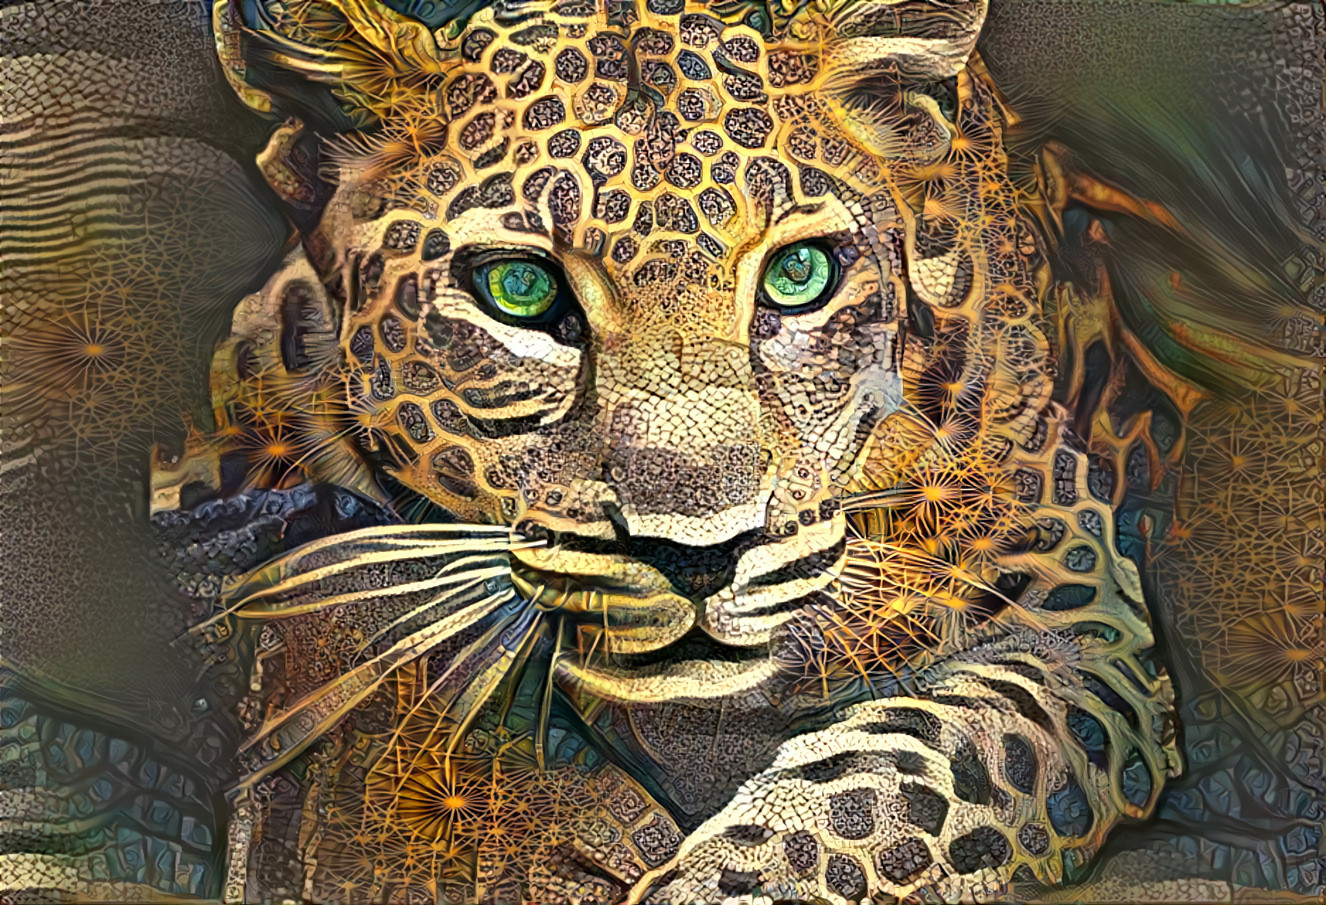 Indochinese Leopard [1.2MP]